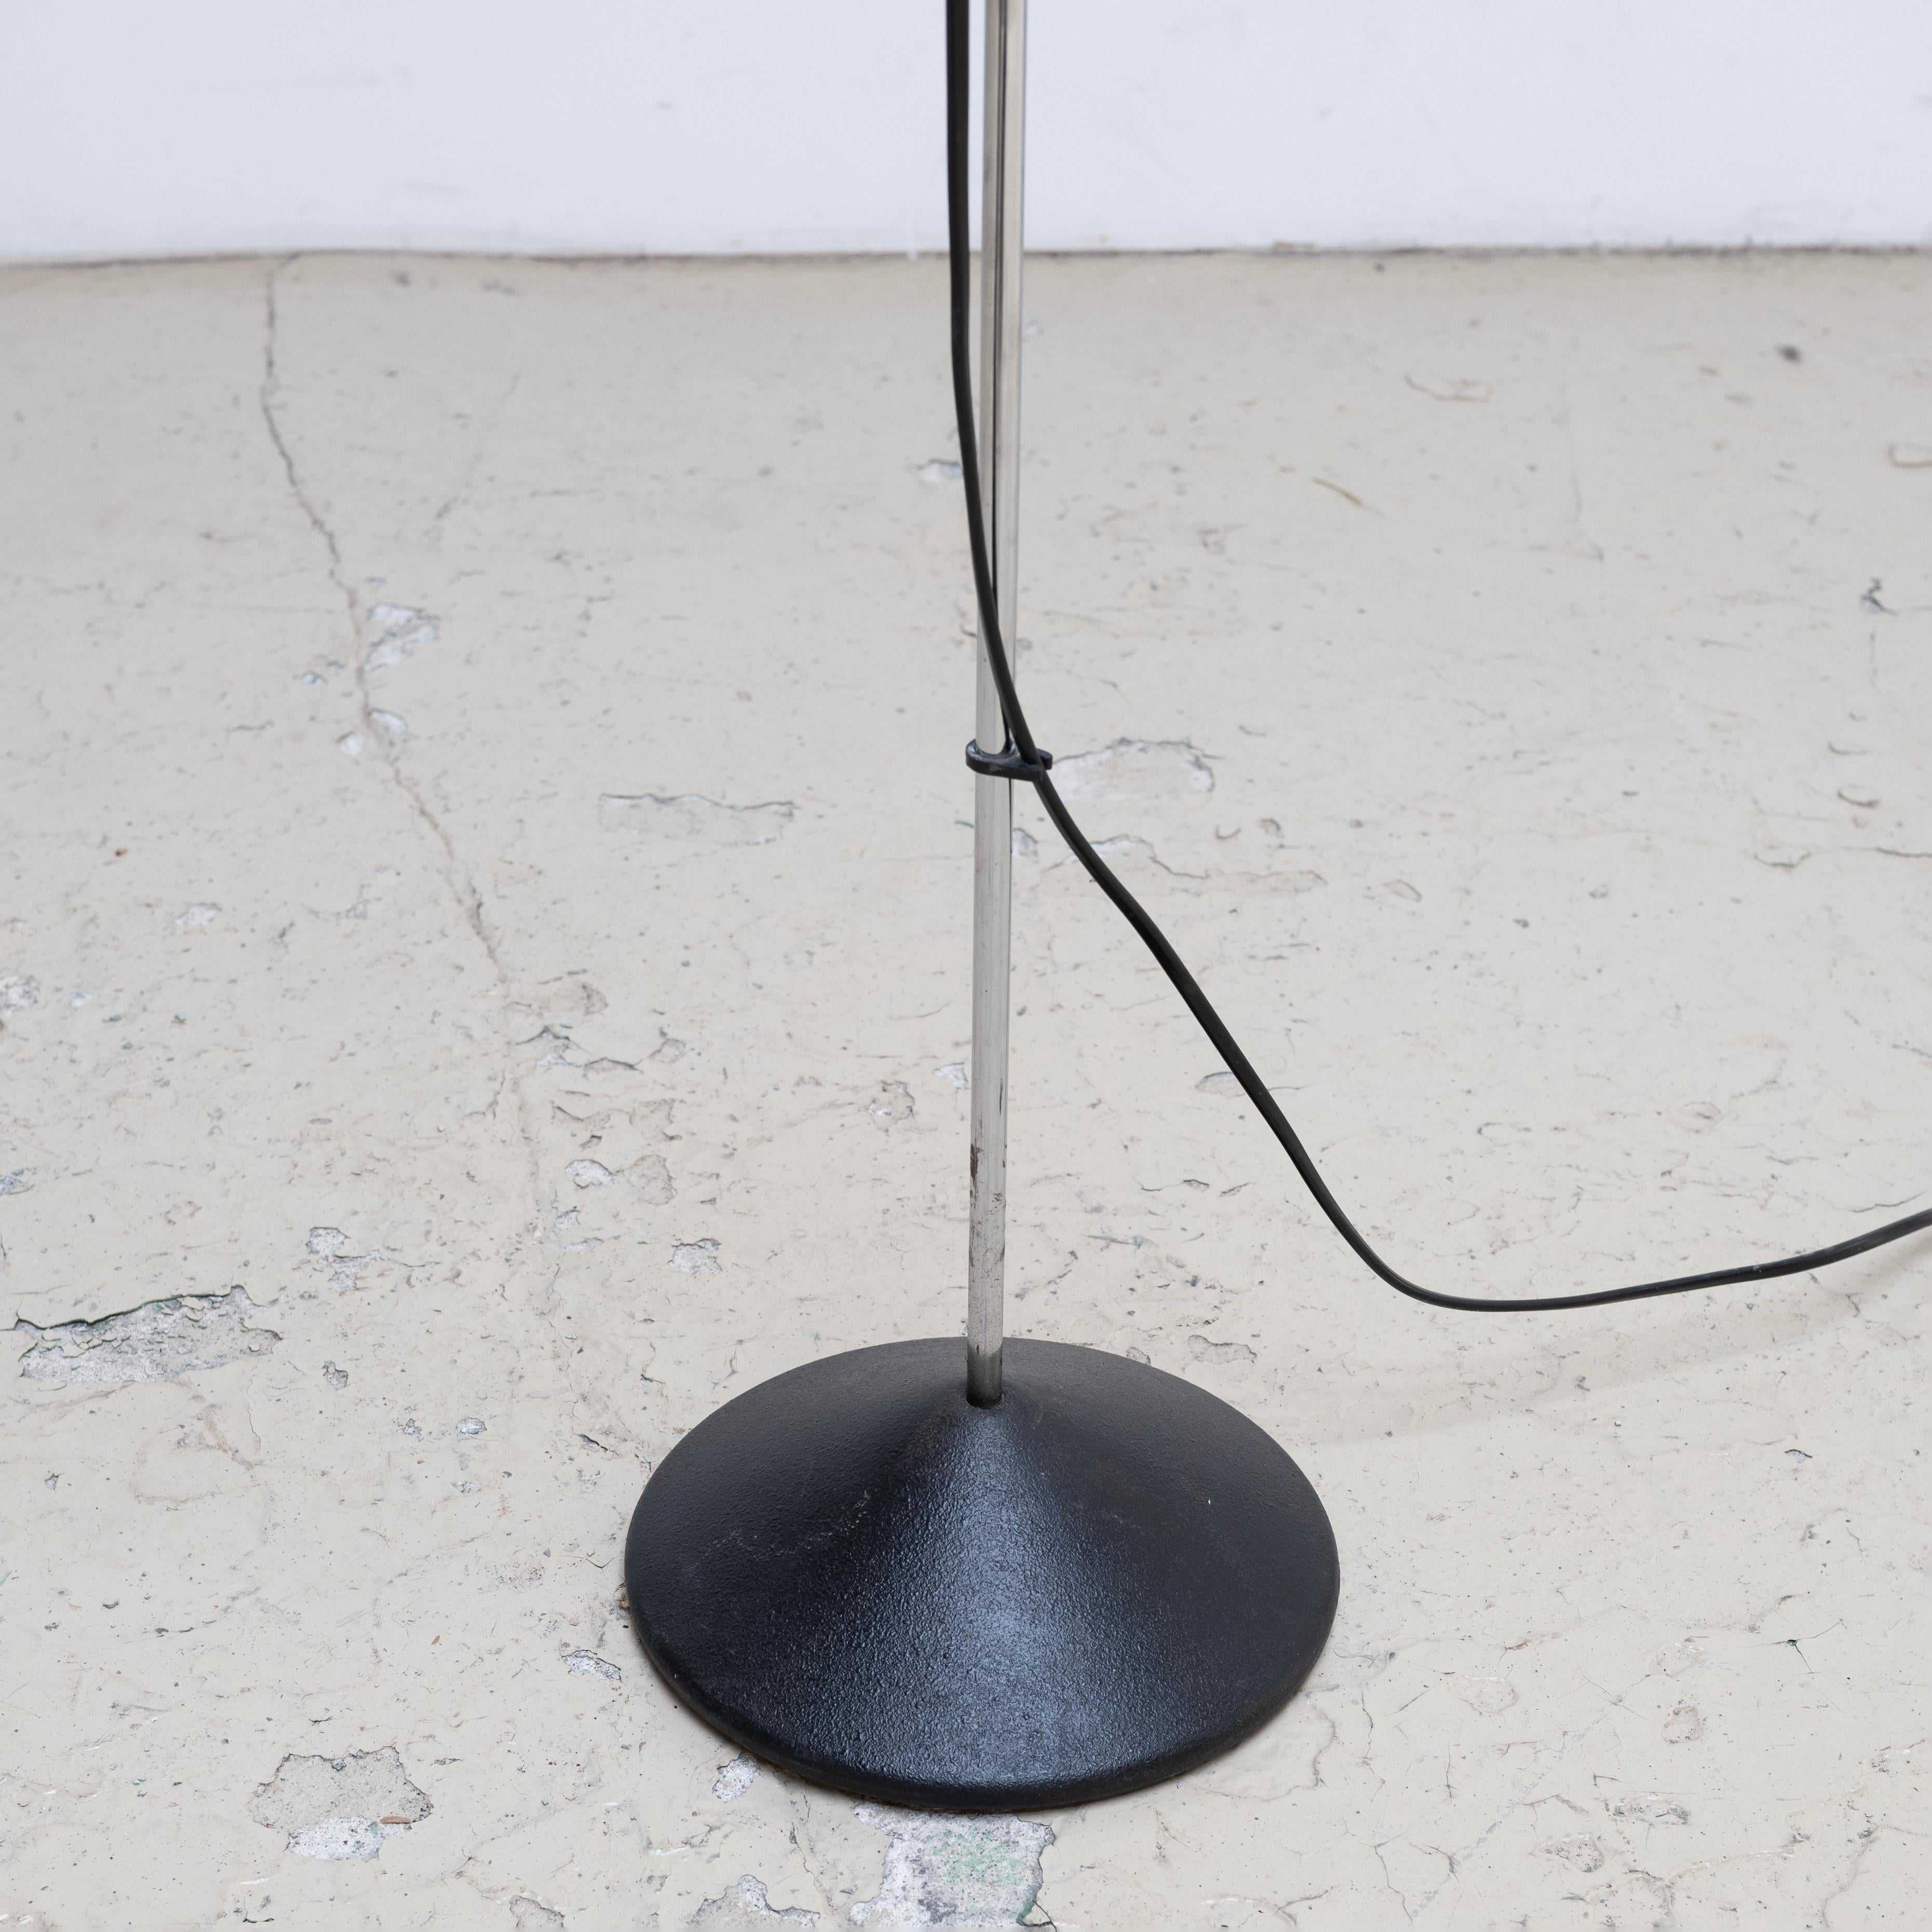 Floor lamp from the Italian lighting manufacturer Valenti, produced in the 1970s.
The height of the lampshade is adjustable.